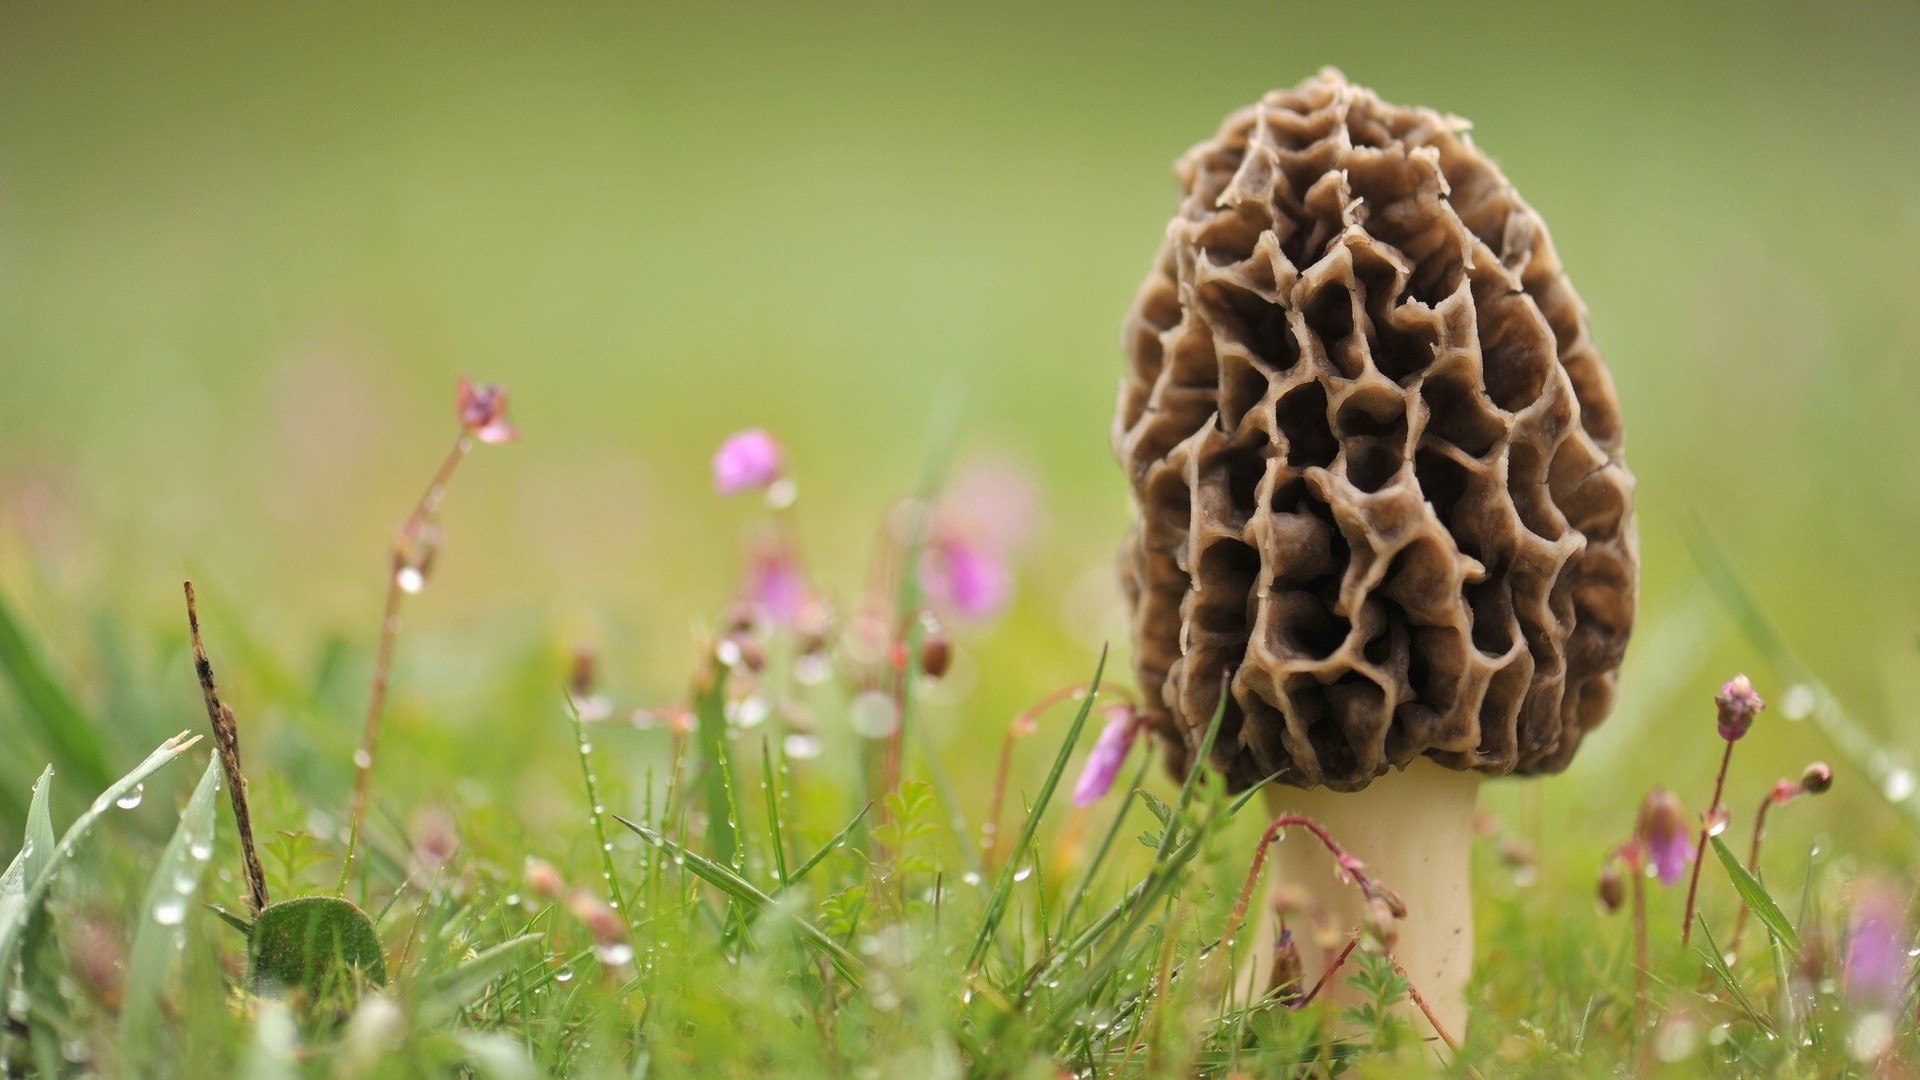 Morel mushroom wallpapers and images   wallpapers pictures photos 1920x1080